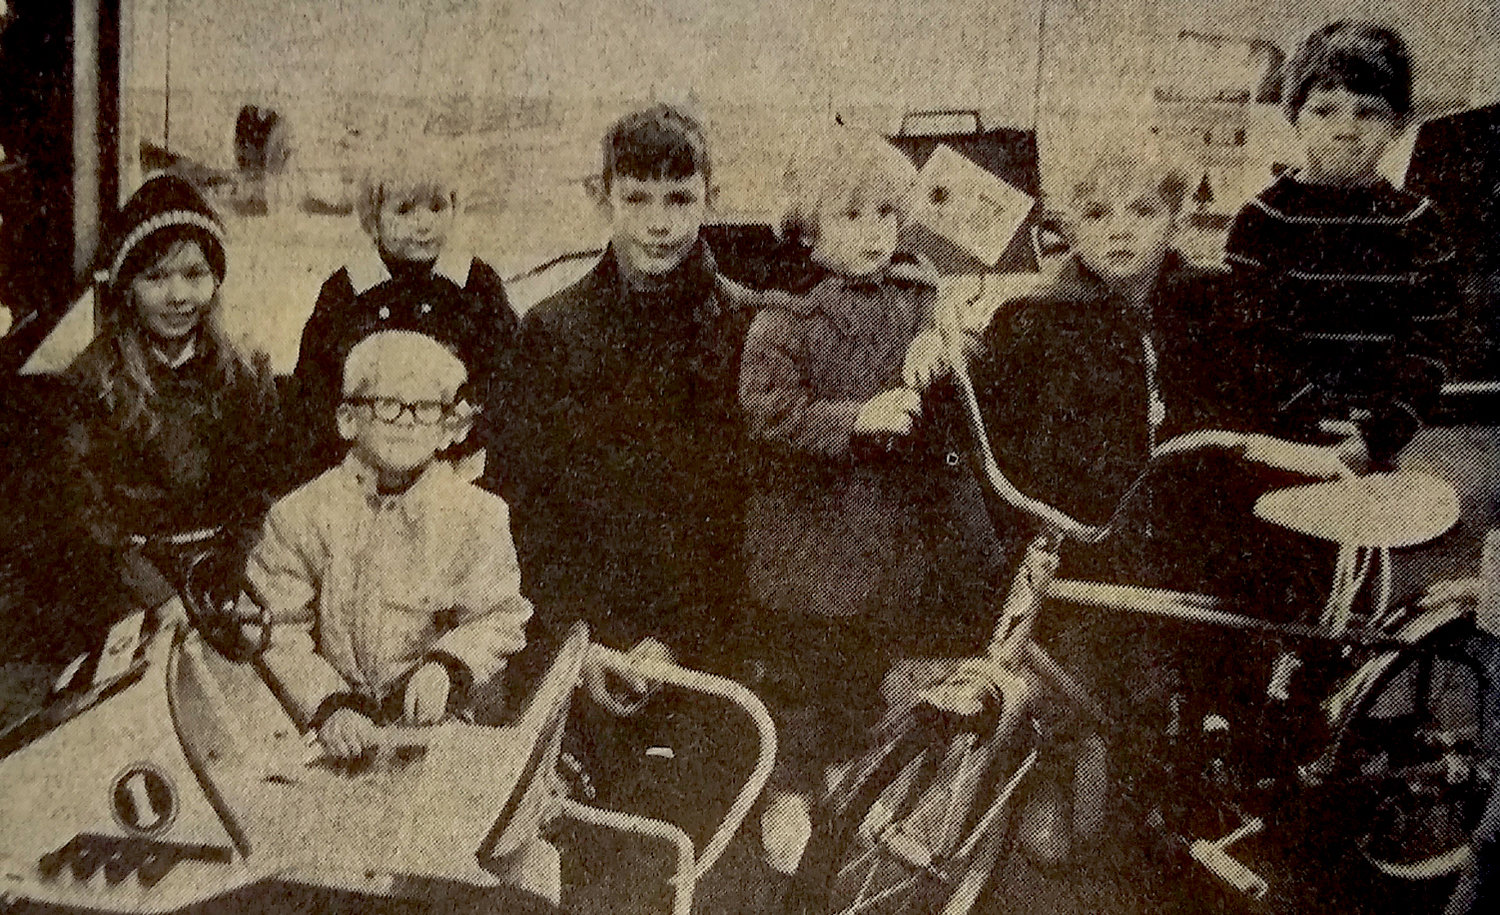 FIFTY YEARS AGO: The Boys and Girls Contest winners at Swenson Drugstore this year are Philip McAdaragh, Brenda Nelson, Dawn Tolzin, Kenny Ball, Tammy McMasters, Matthew Wayrynen and Joel Thorsheim.